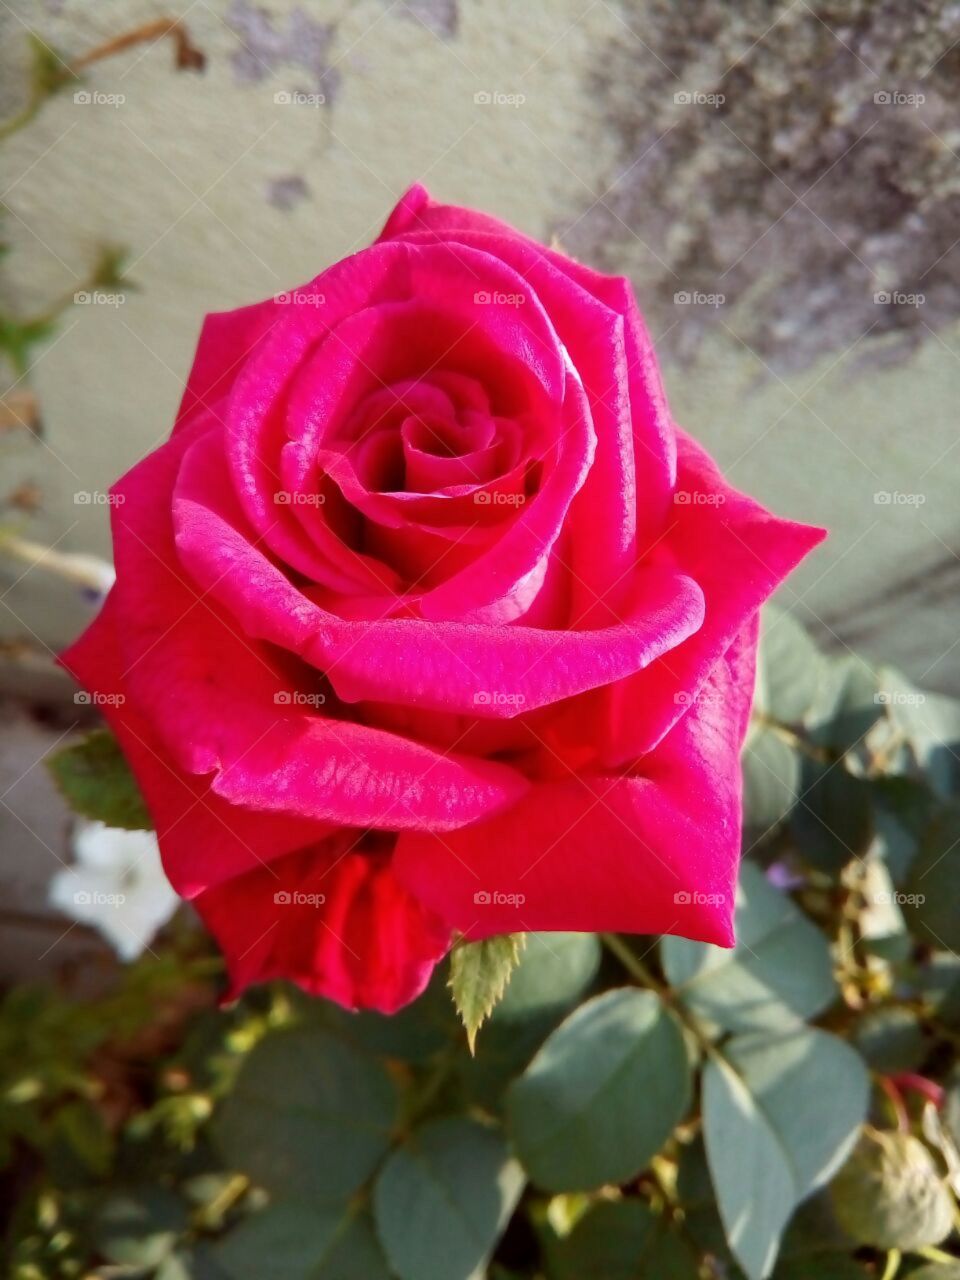 Rose is the symbol of love.